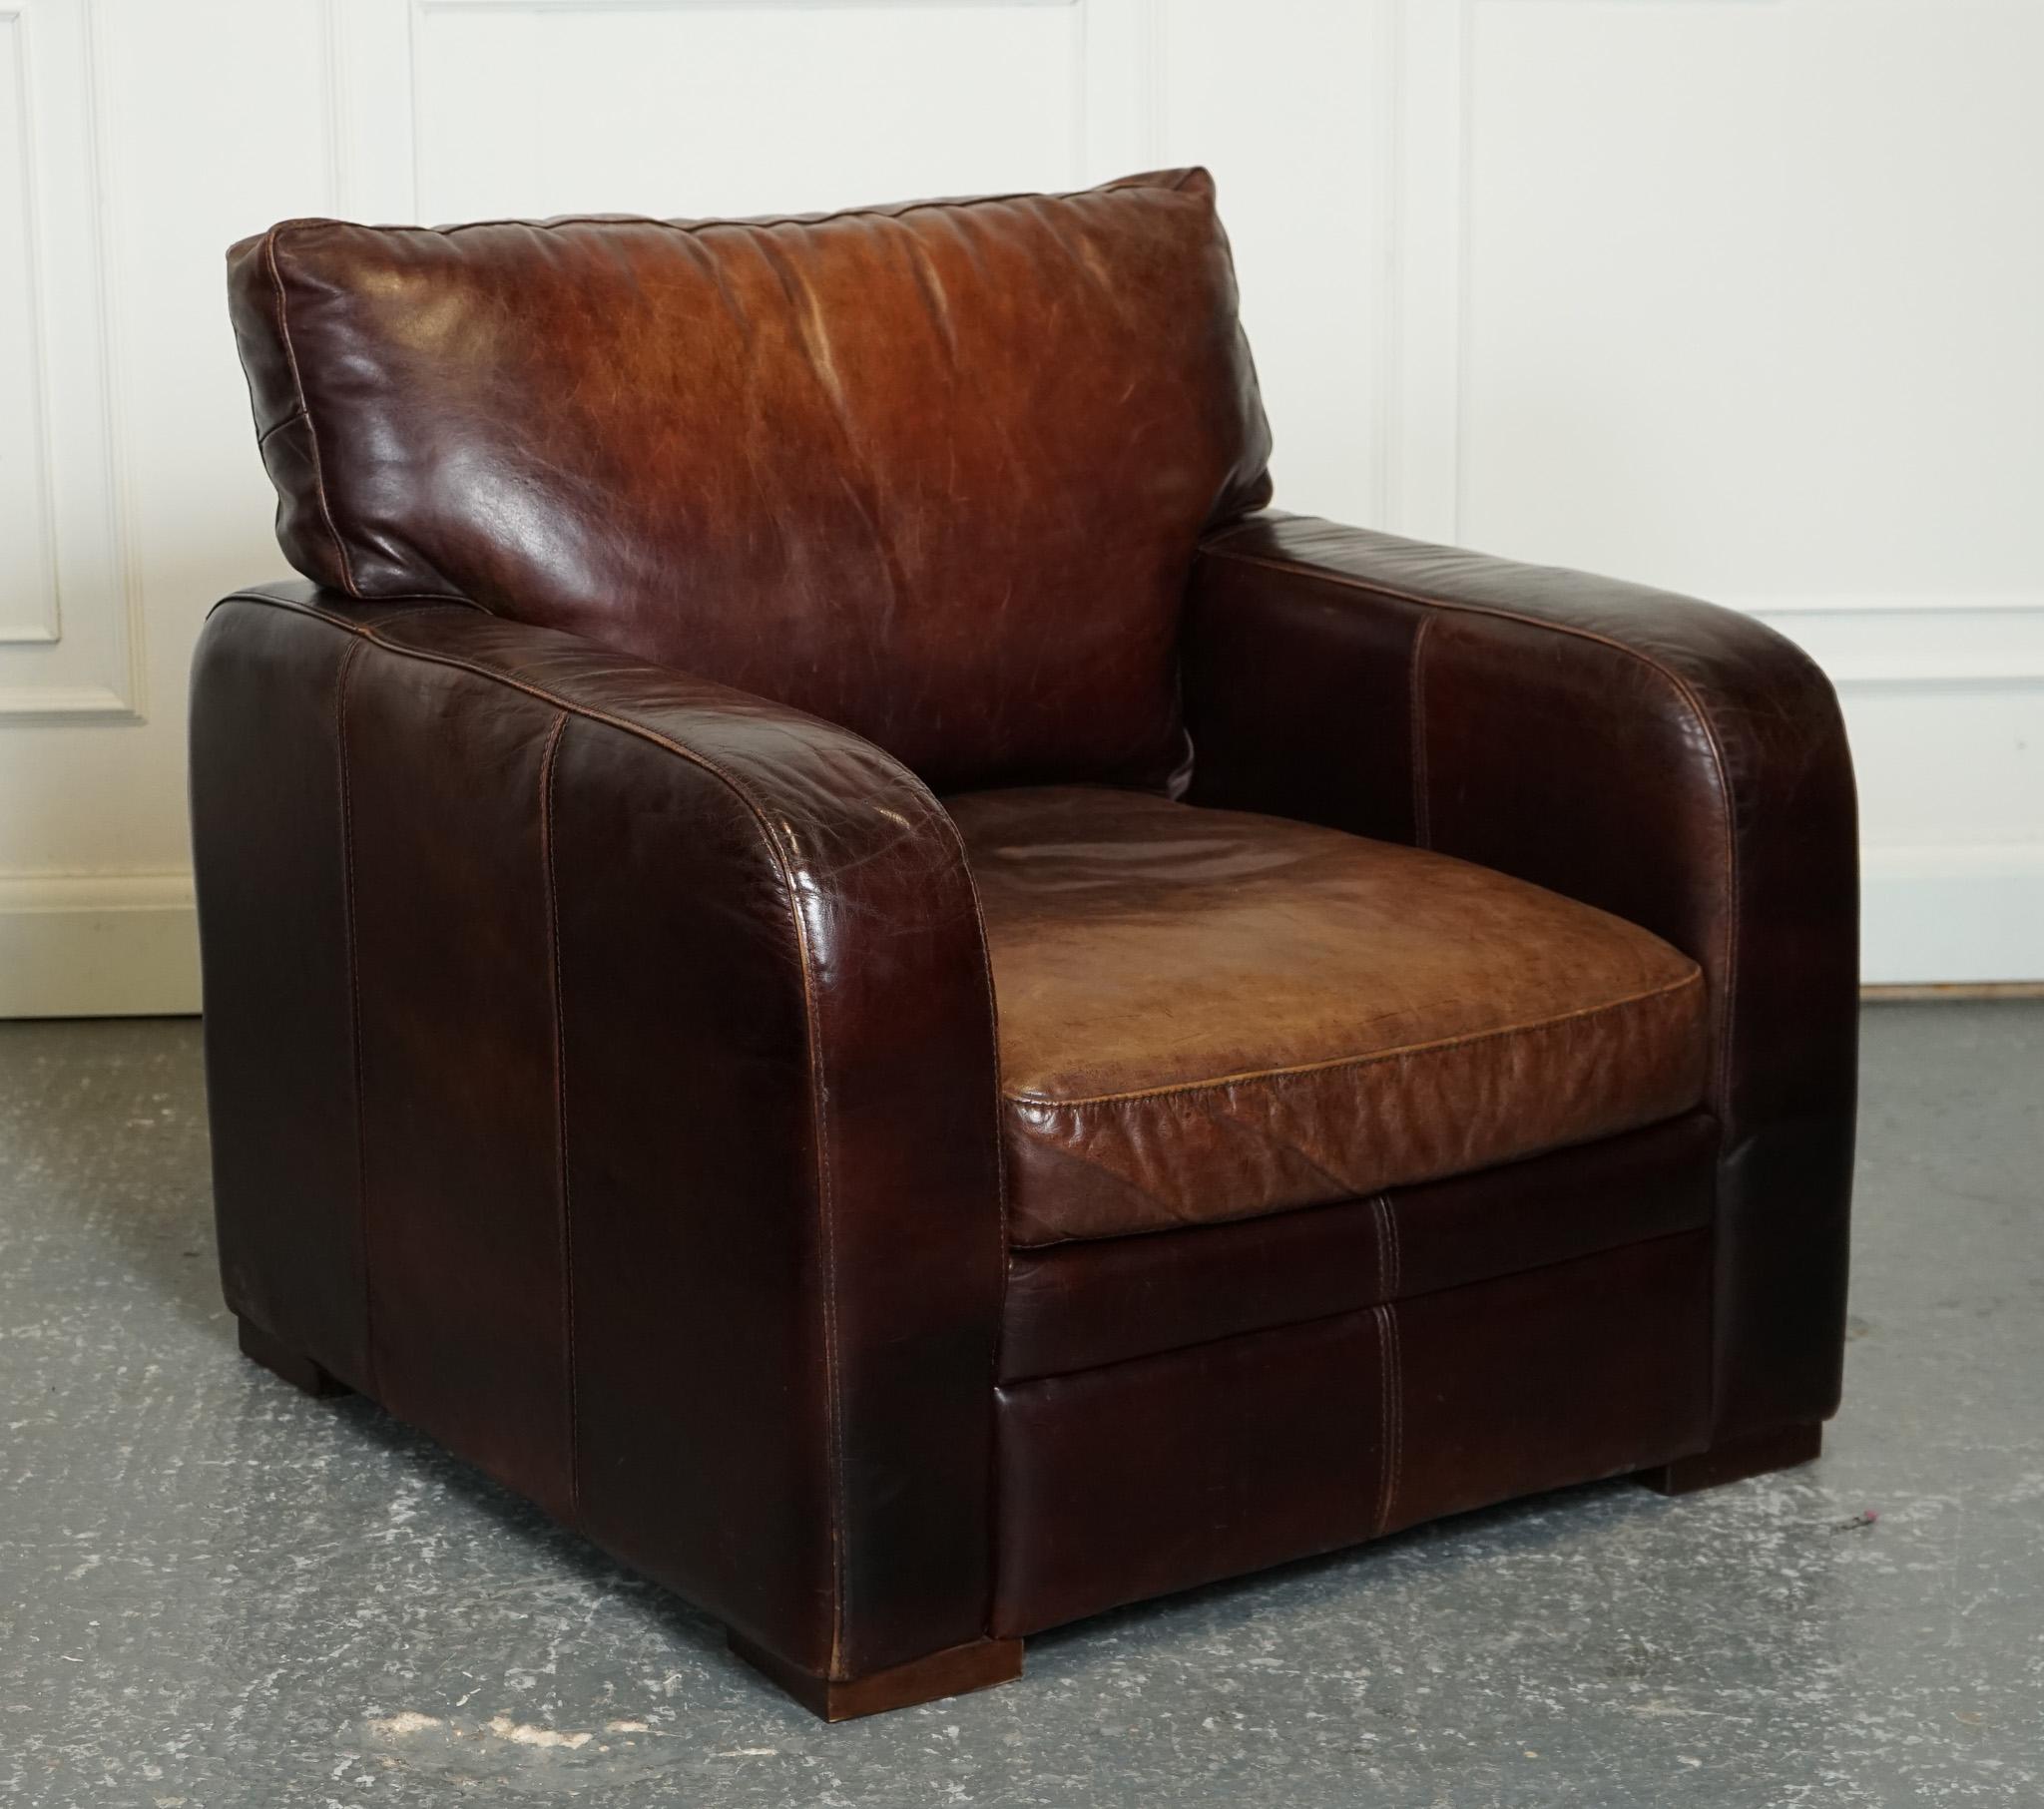 STUNNiNG VINTAGE PAIR HALO BROWN AGED LEATHER CLUB ARMCHAIRS J1 1